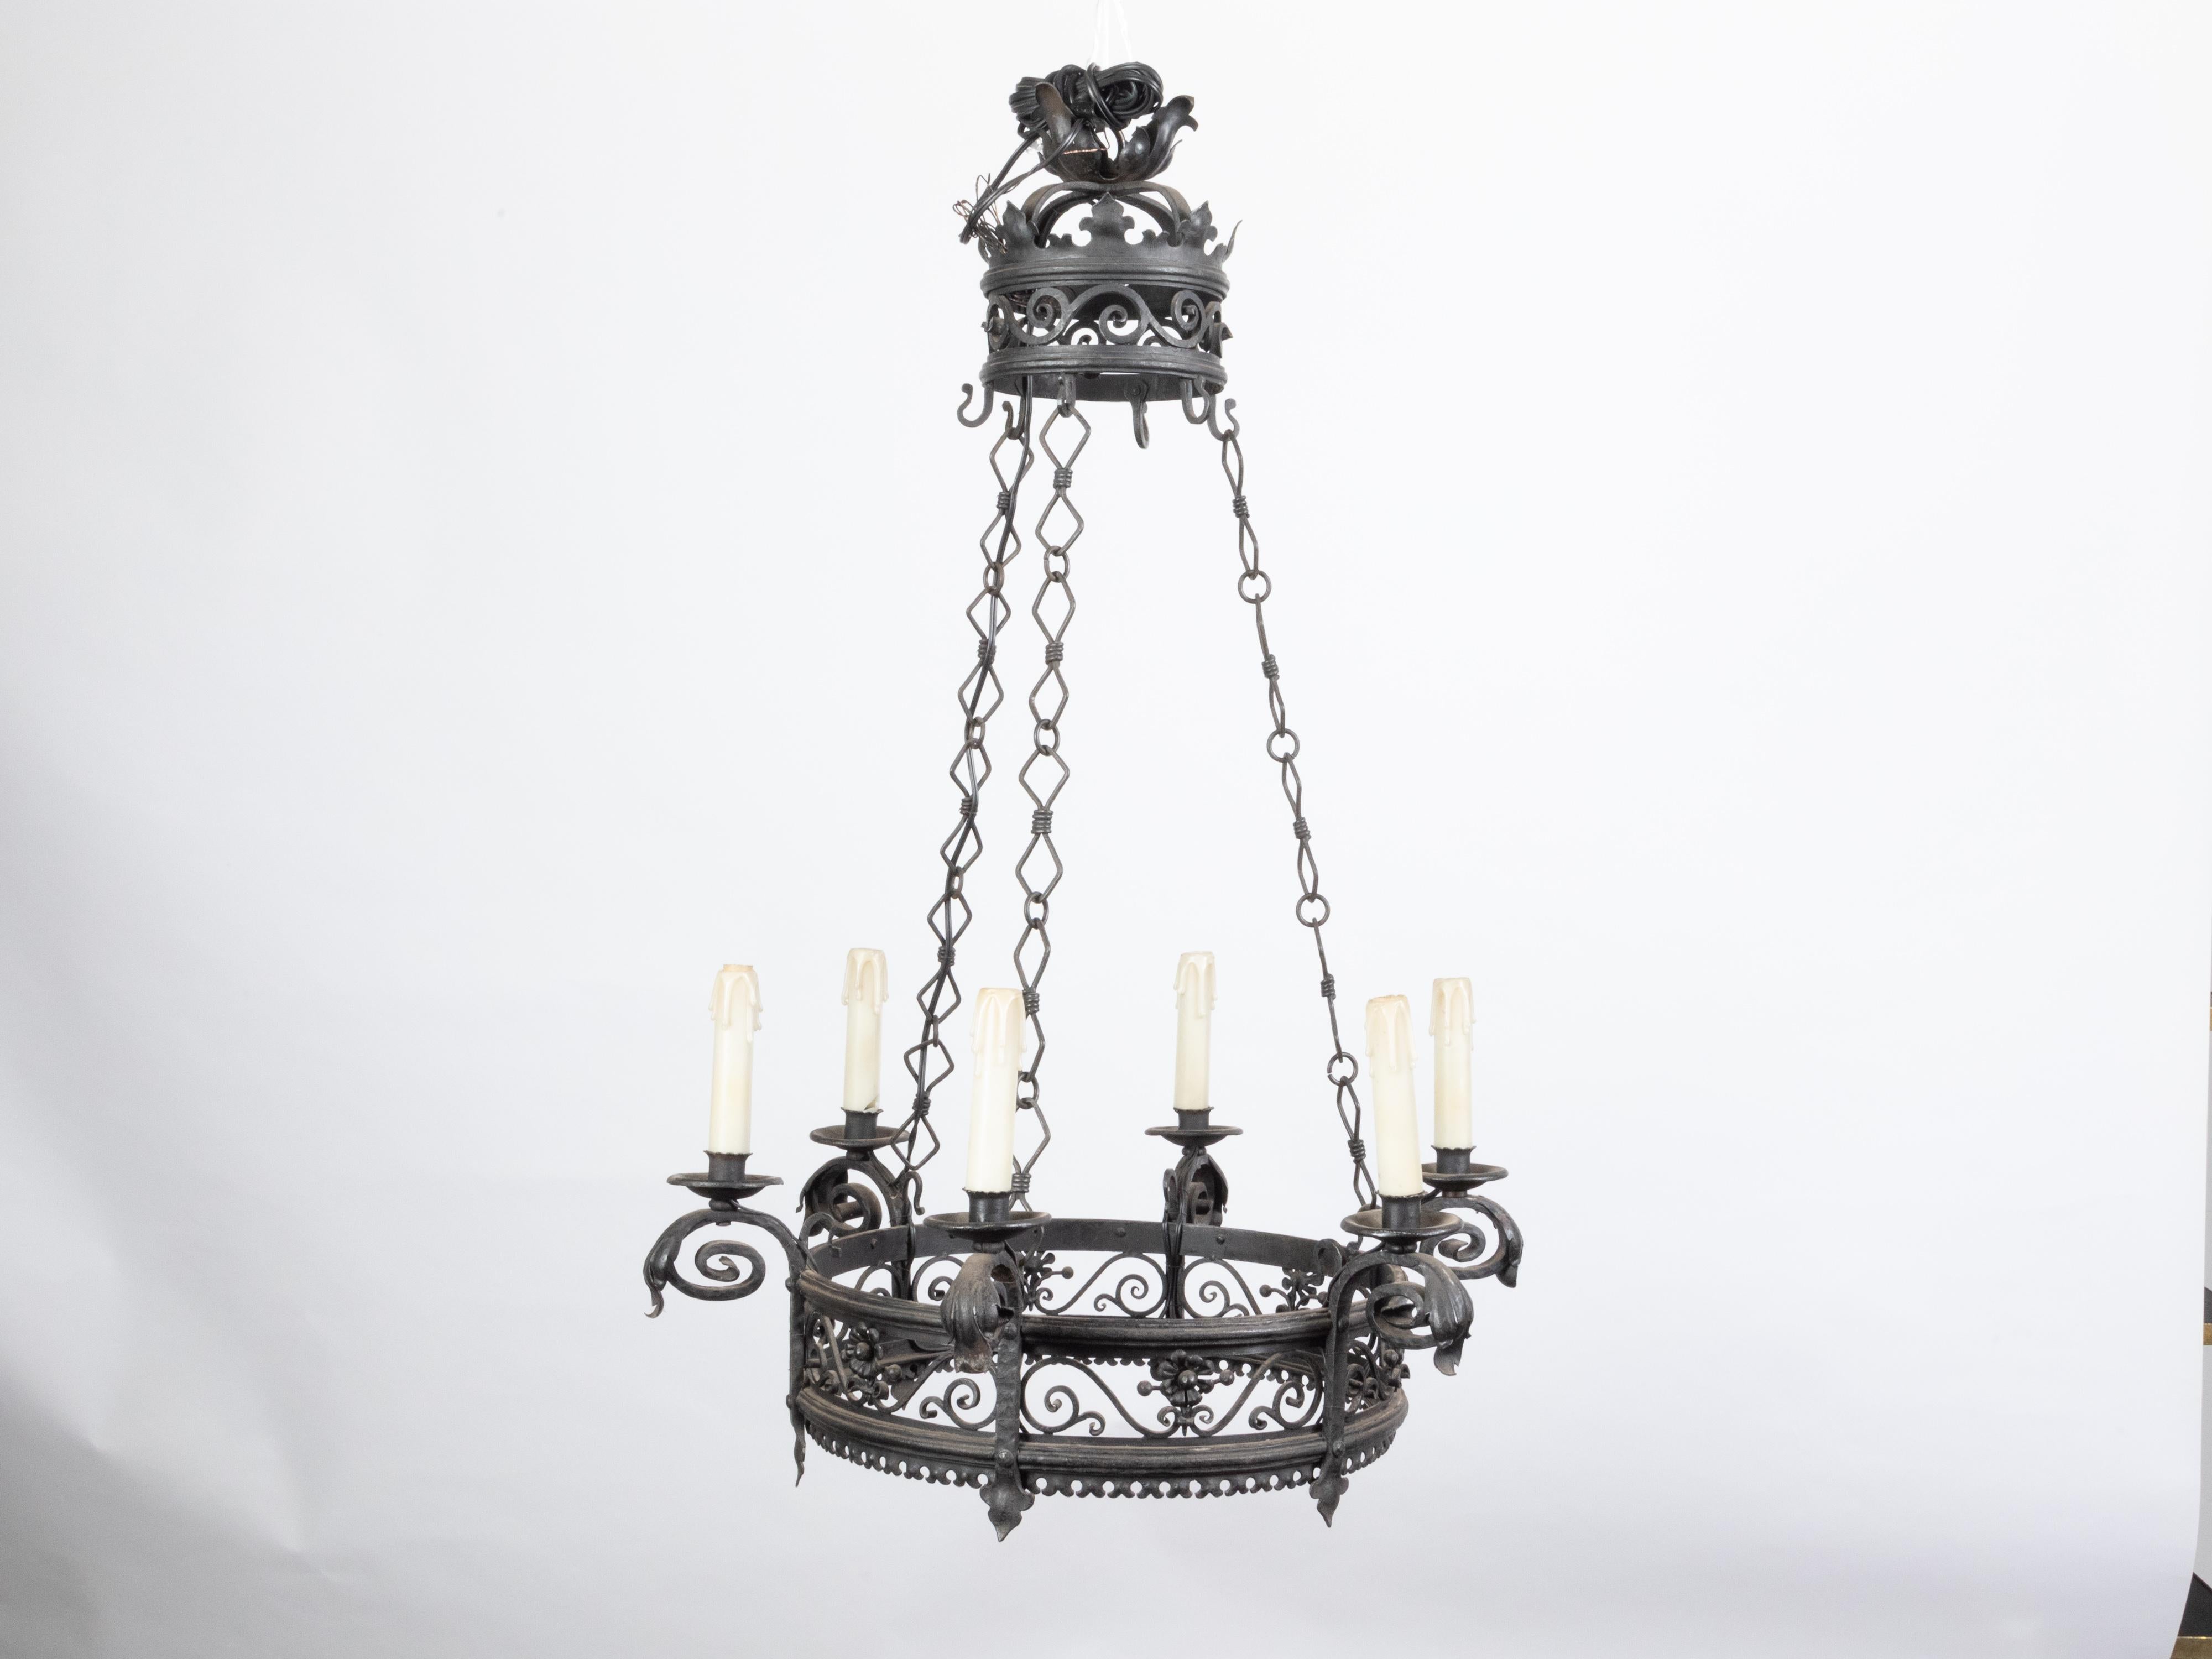 French 1900s Turn of the Century Iron Chandelier with Six Lights and Scrollwork In Good Condition For Sale In Atlanta, GA